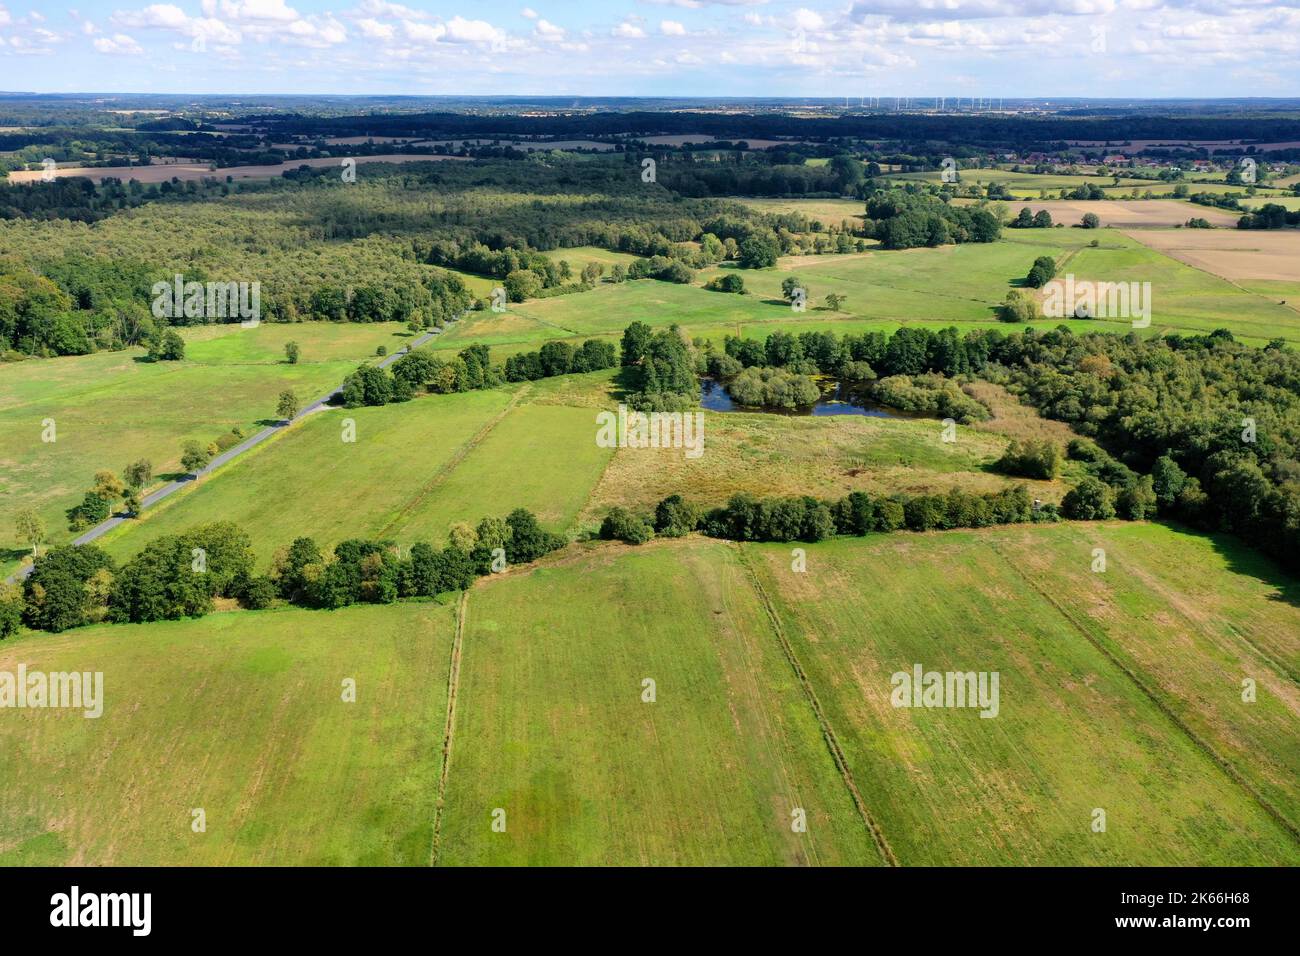 Meadows at the Koberg Moor, aerial view, Germany, Schleswig-Holstein Stock Photo